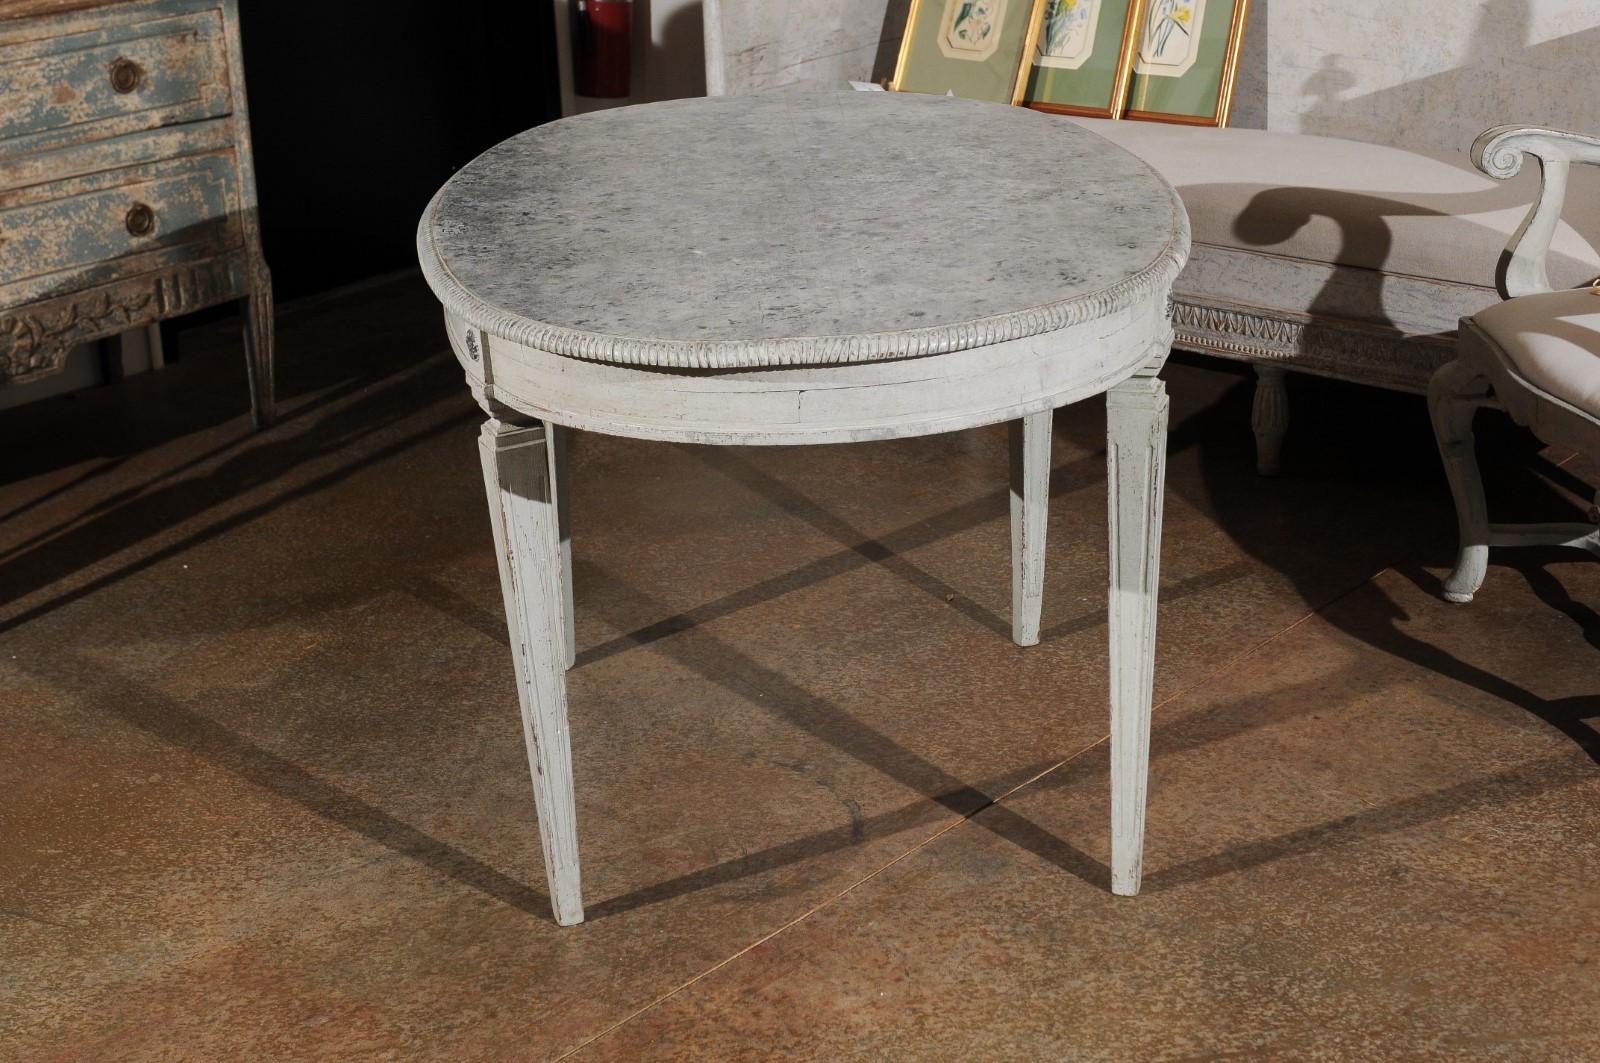 19th Century Swedish Gustavian Style Grey Painted Table with Marbleized Oval Top, circa 1880